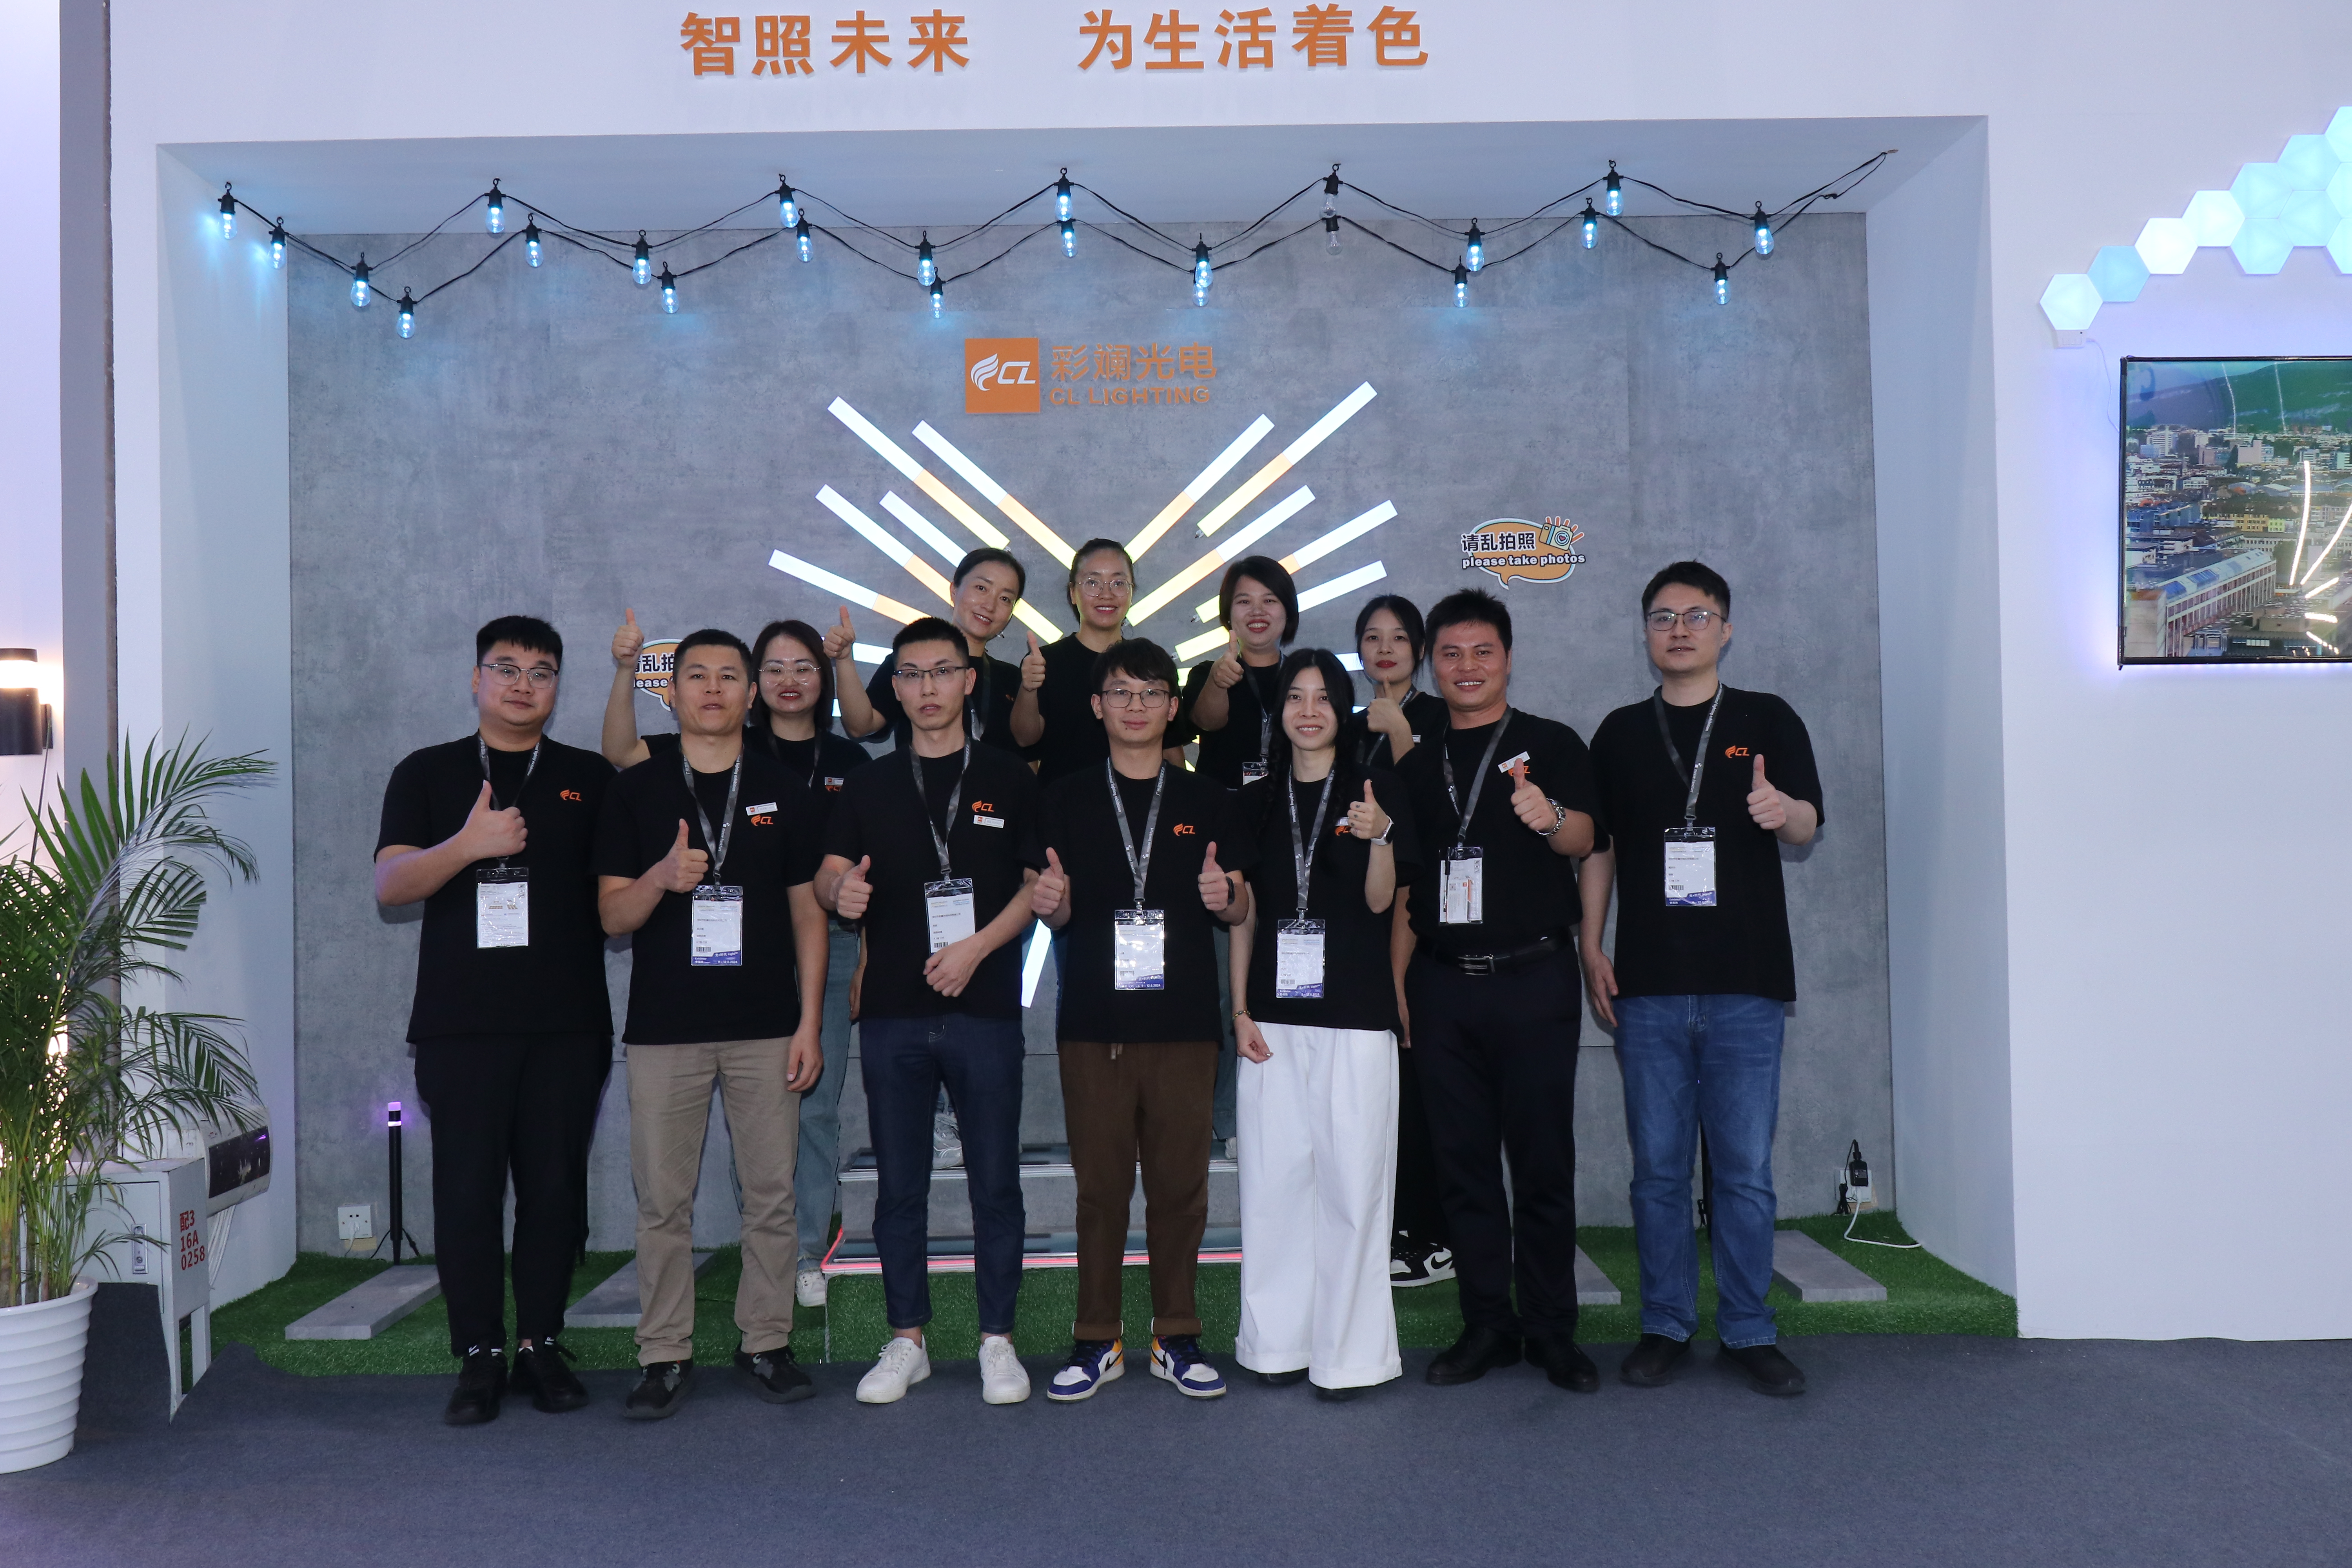 Guangzhou international lighting Exhibition has come to a successful conclusion, CL lighting are looking forward to create a beautiful vision with you.